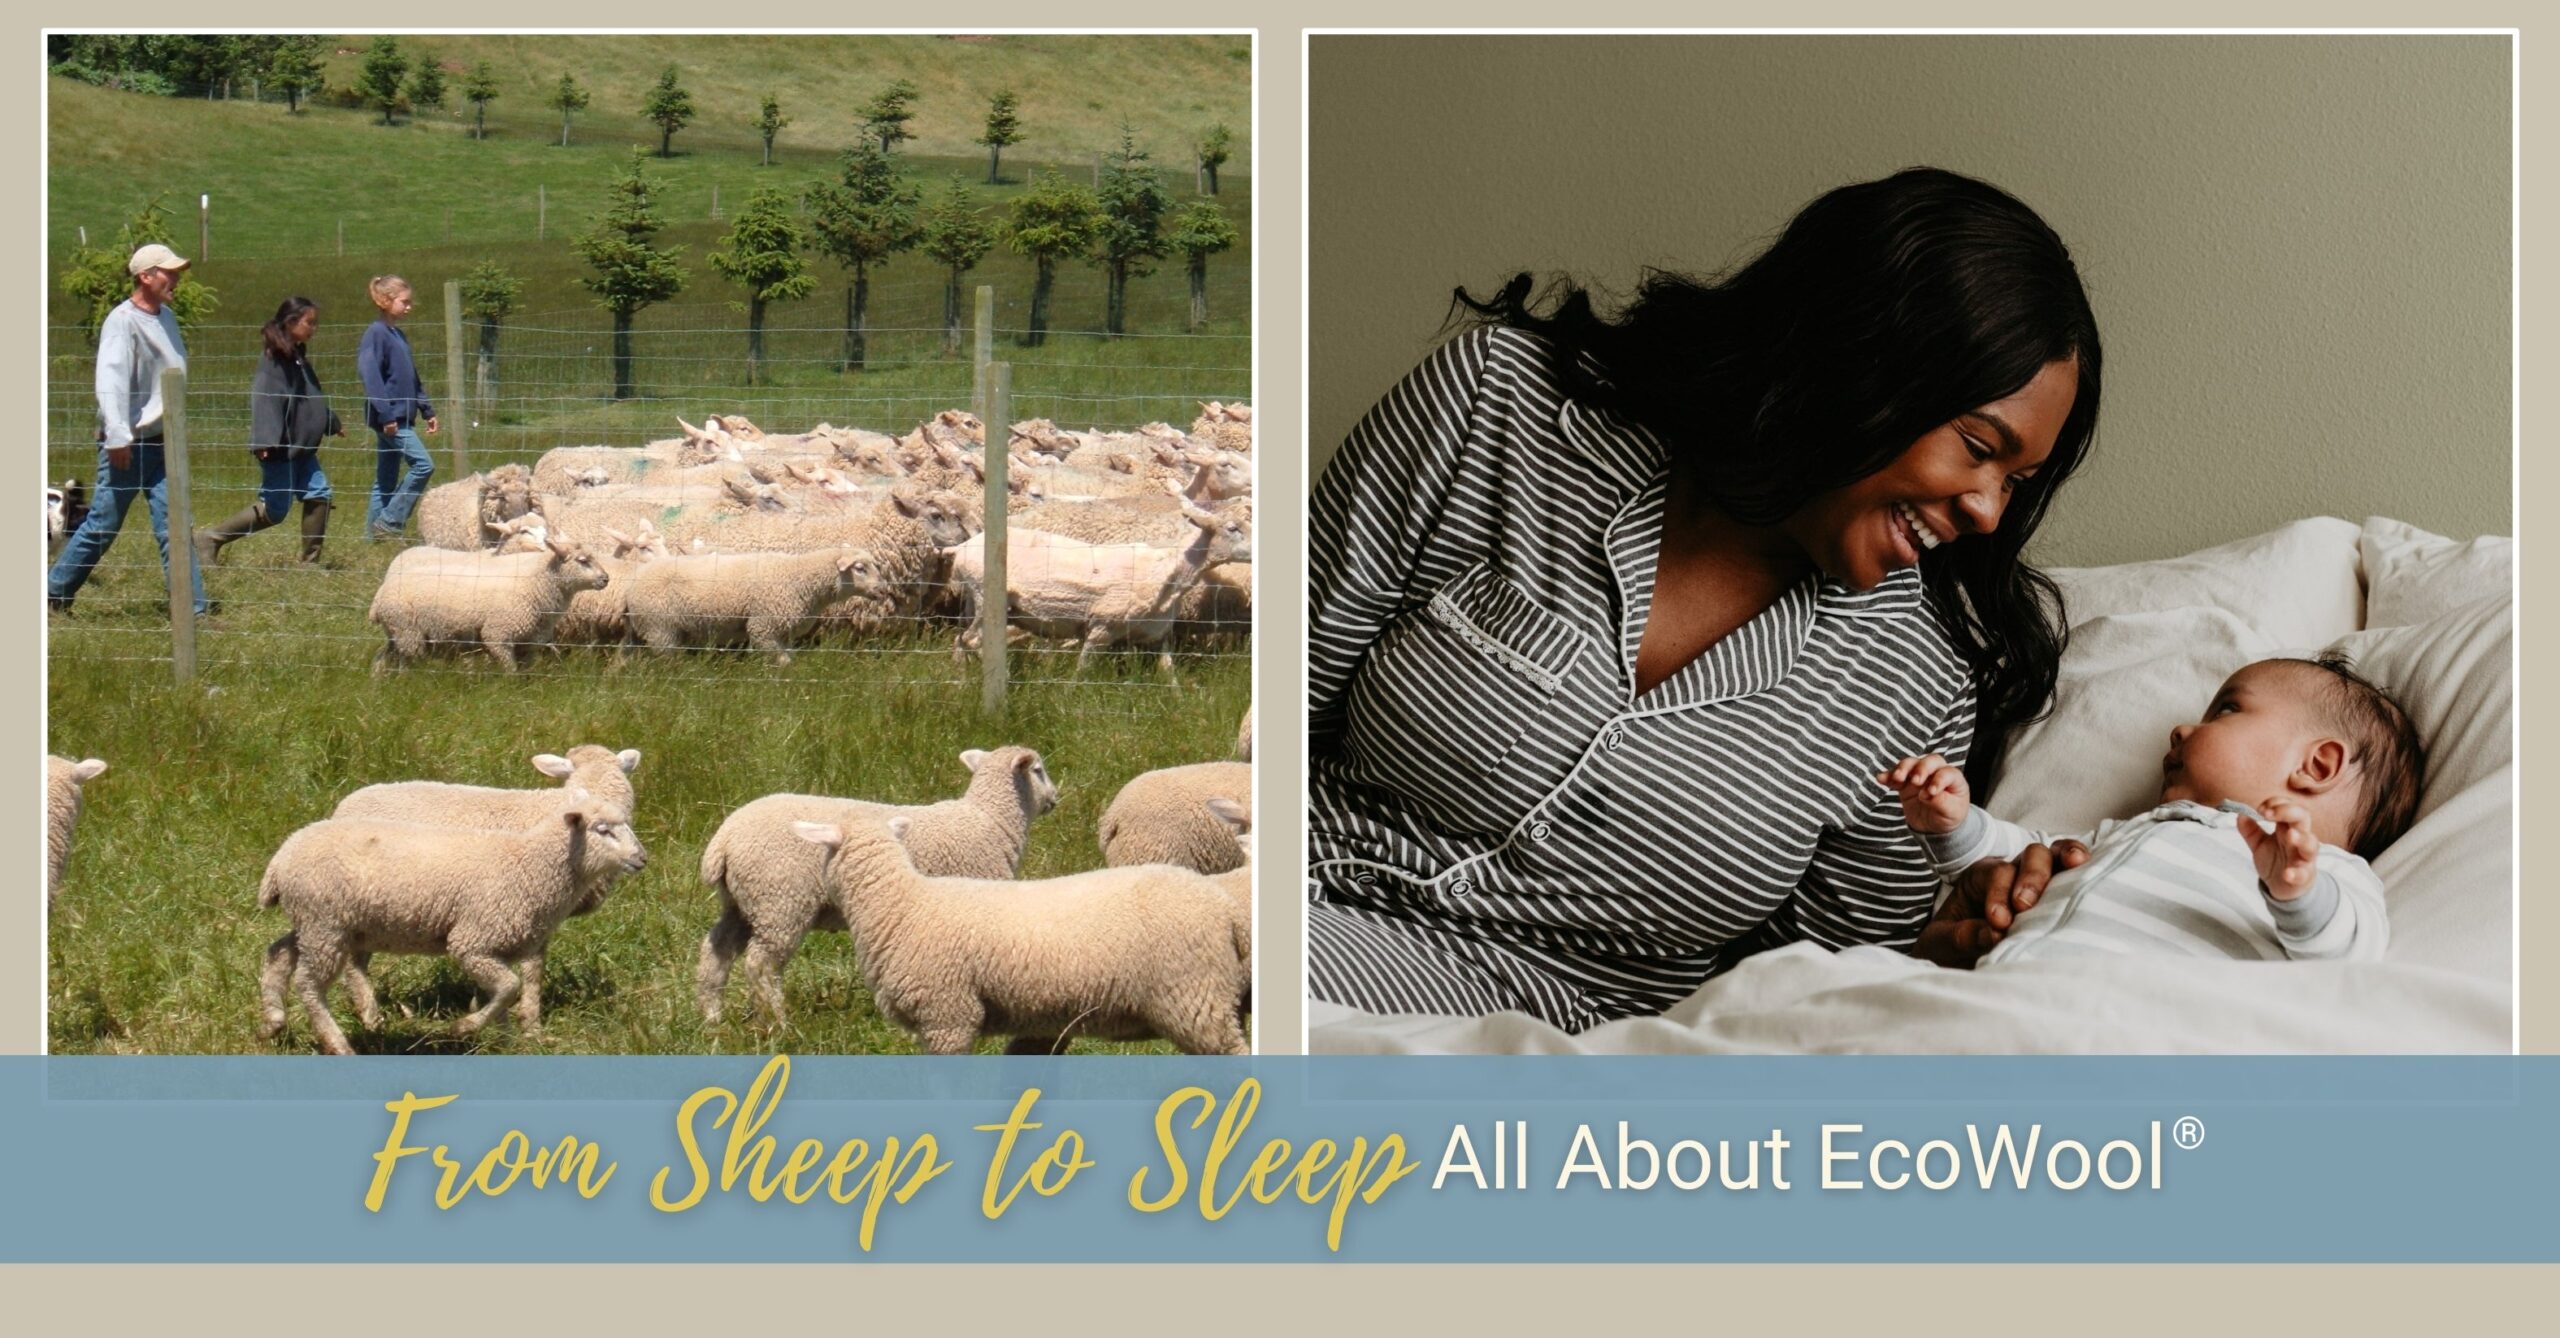 One photo shows a man and two girls herding sheep in a green field with a dog. The other photo shows a woman smiling at her baby in bed.